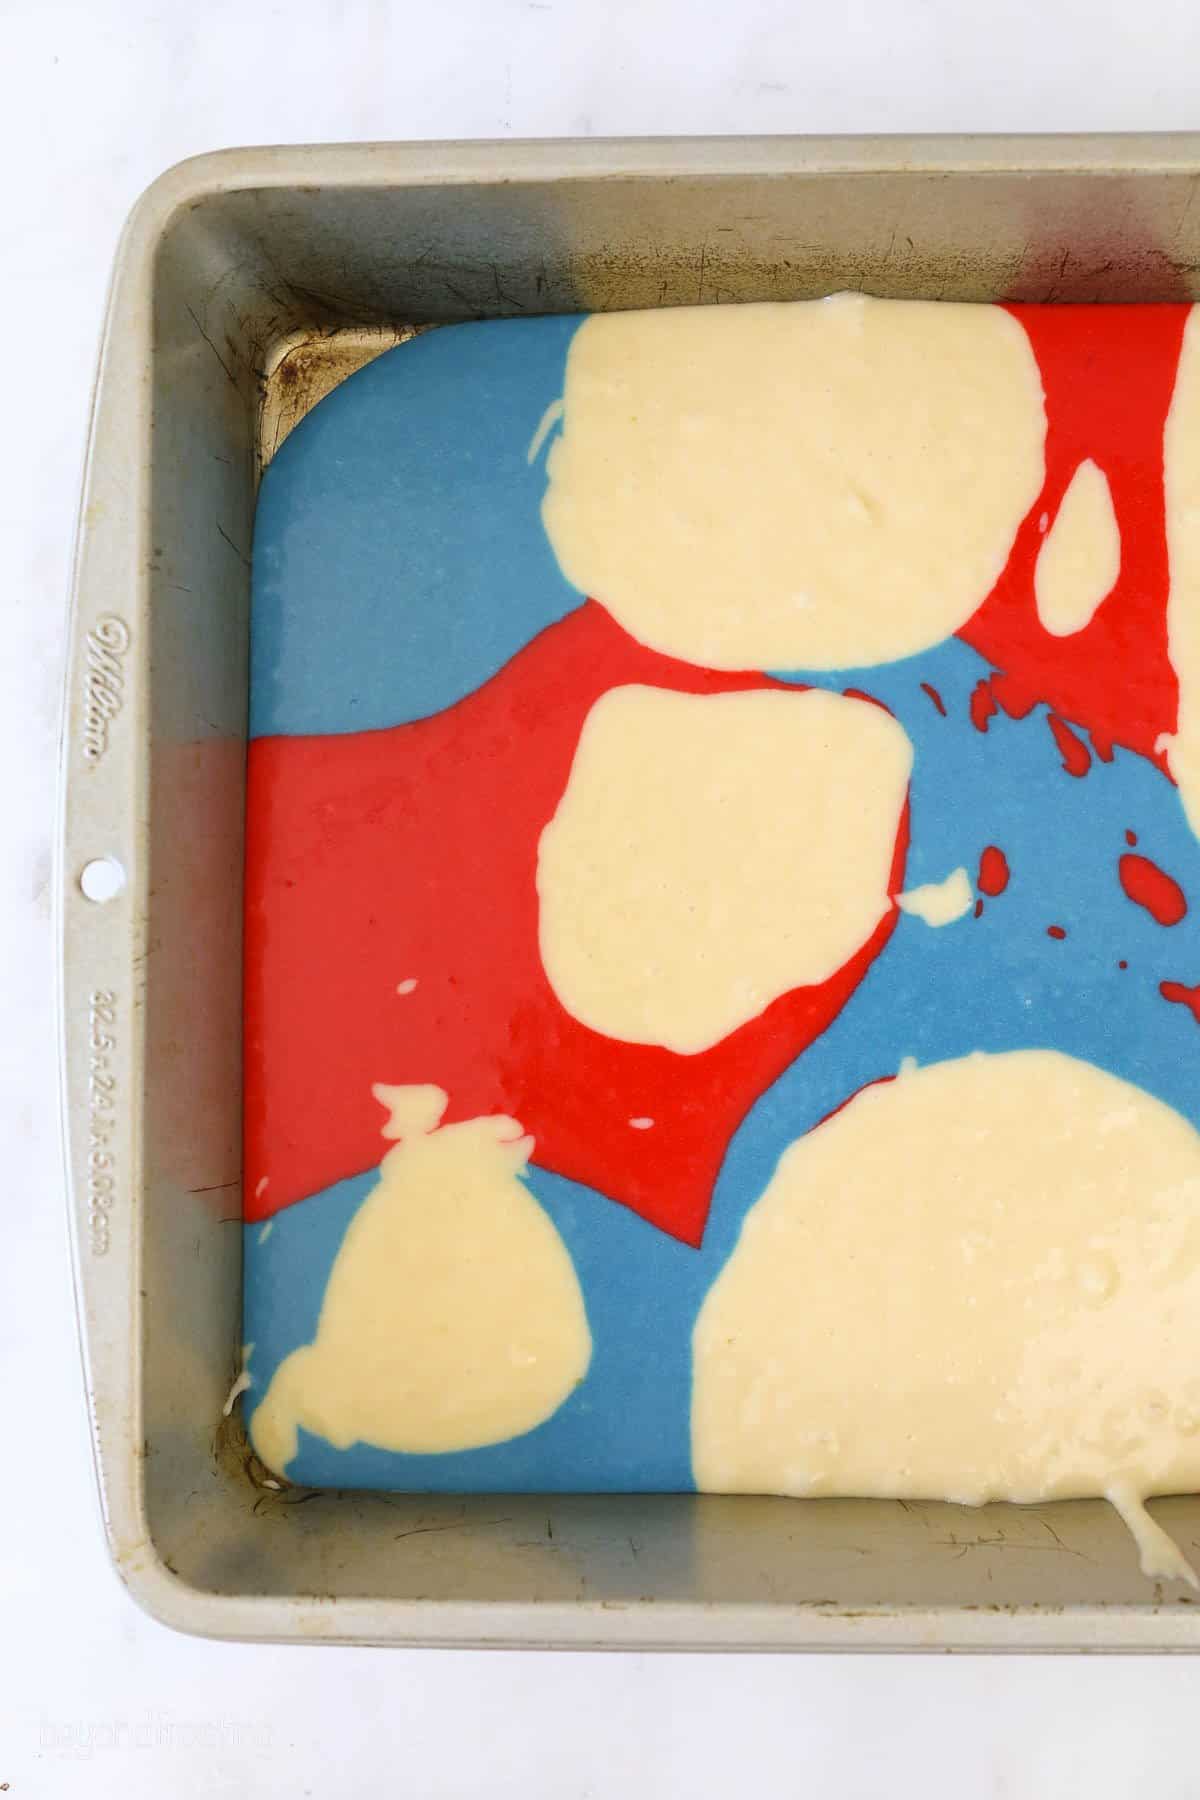 red white and blue cake batter in a cake pan